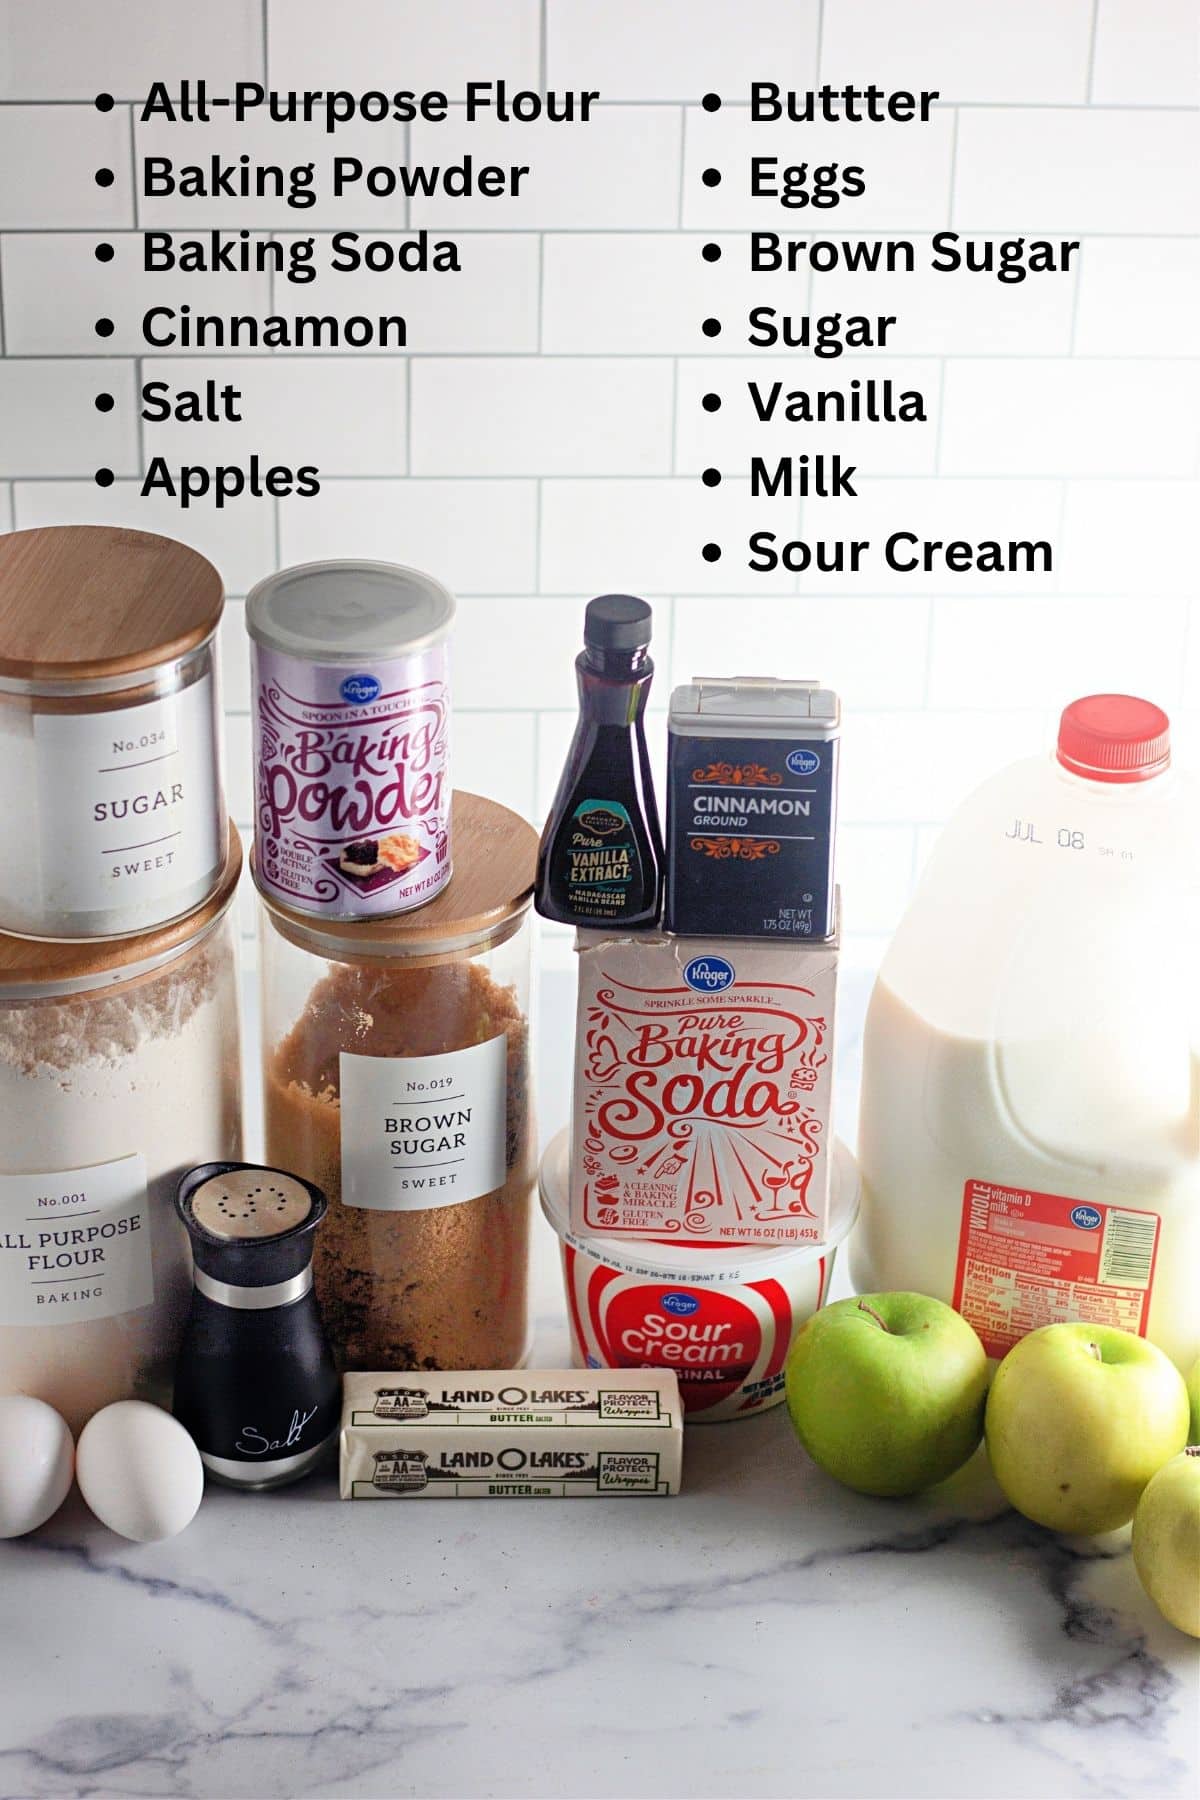 A list of ingredients for a homemade muffins that includes apples and cinnamon.